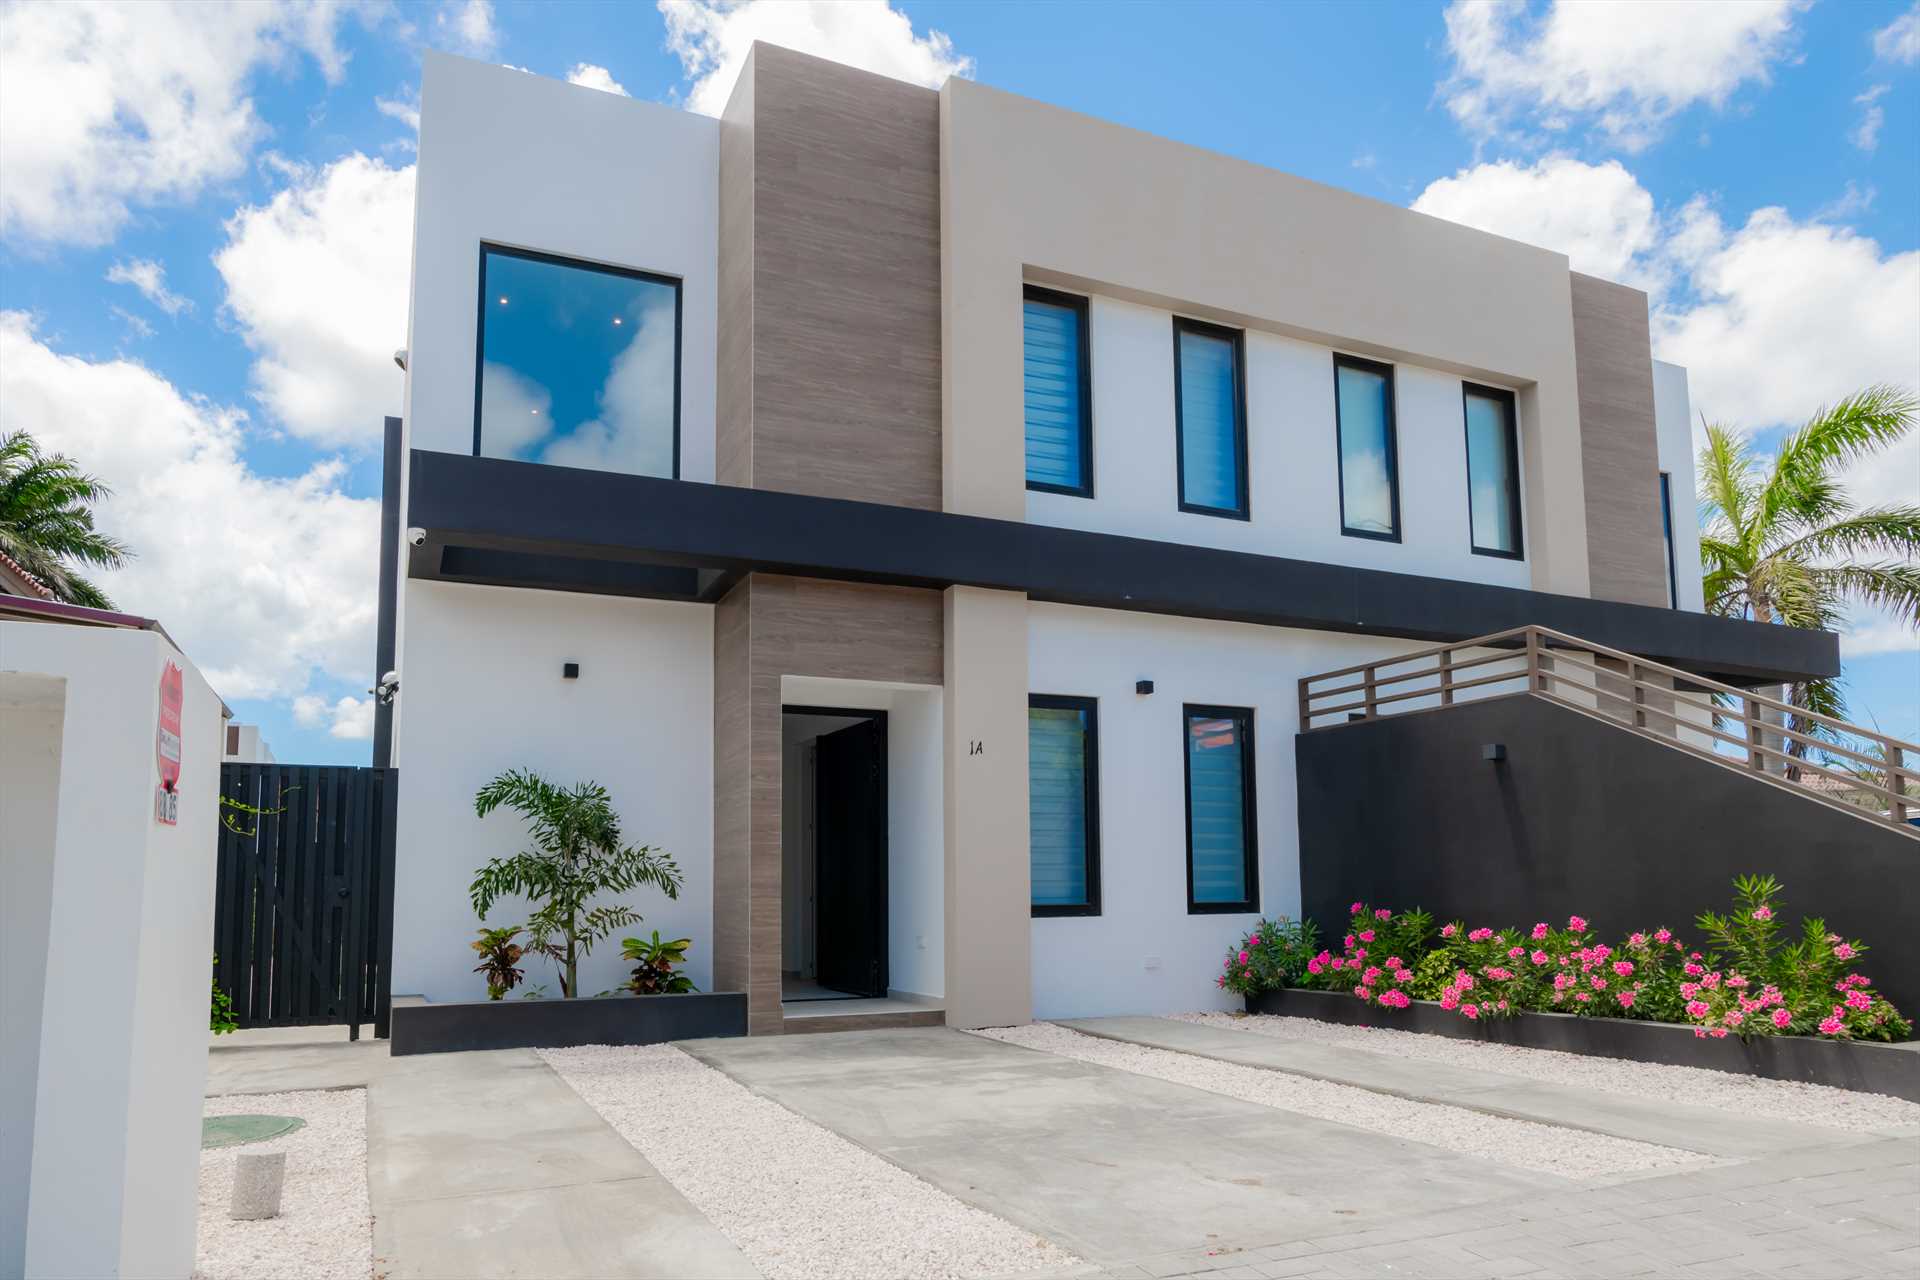 Indulge in this newly built 2-level vacation home with free parking